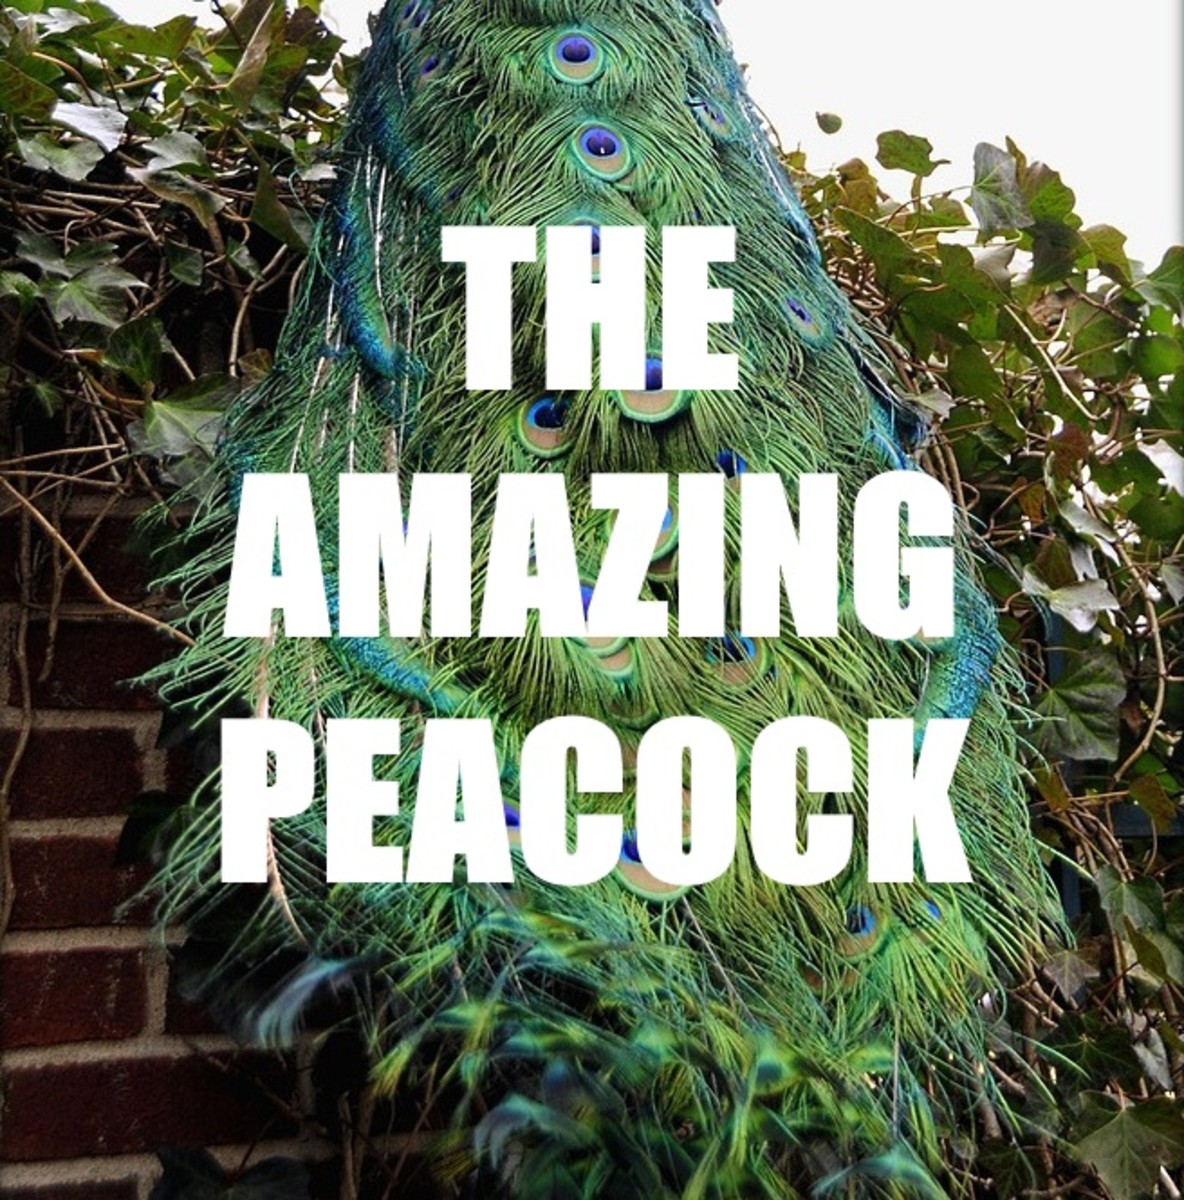 The beautiful and amazing peacock.